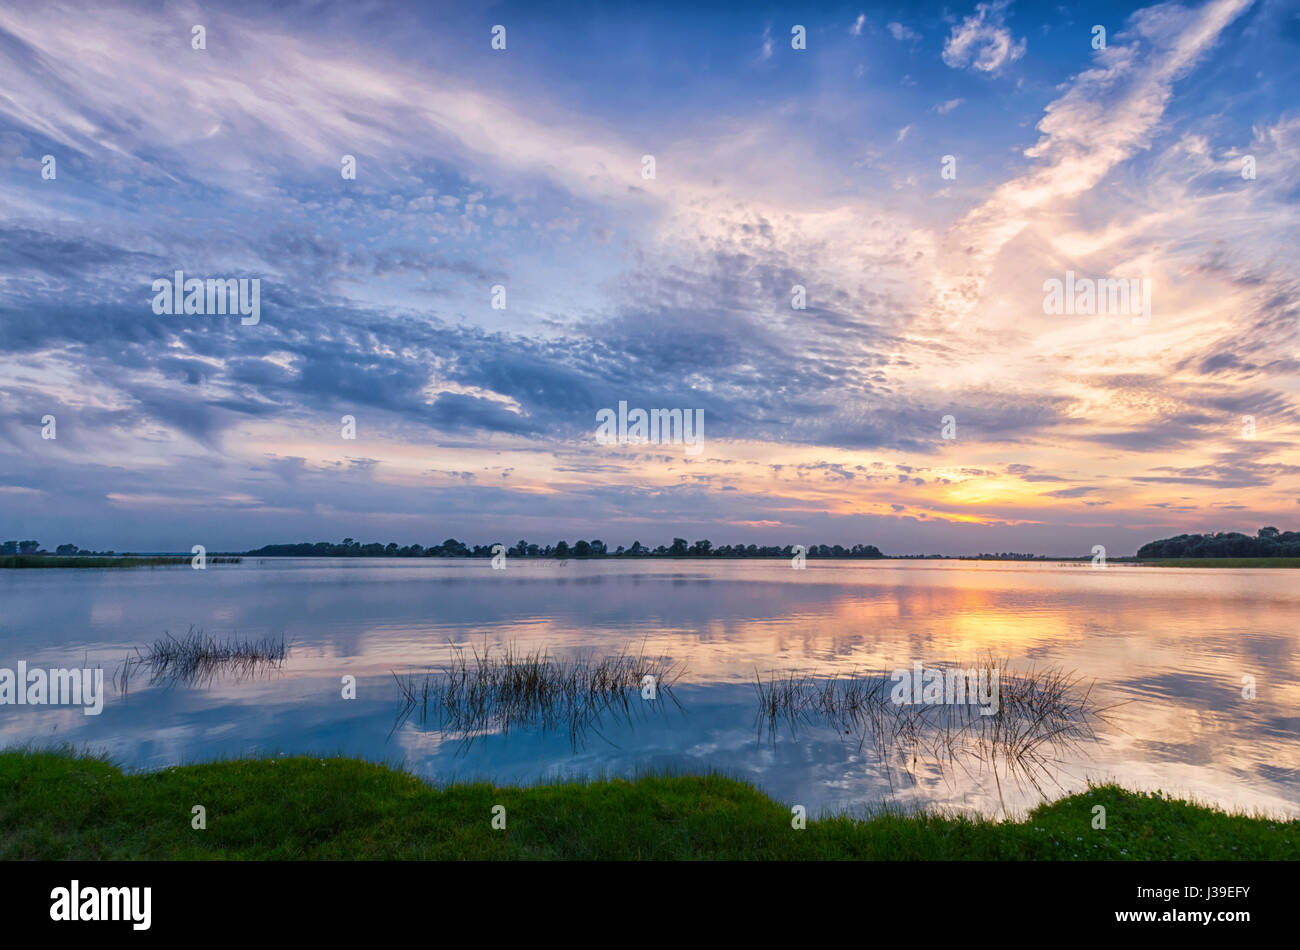 Sunset over the River, beautiful sky and reflection Stock Photo